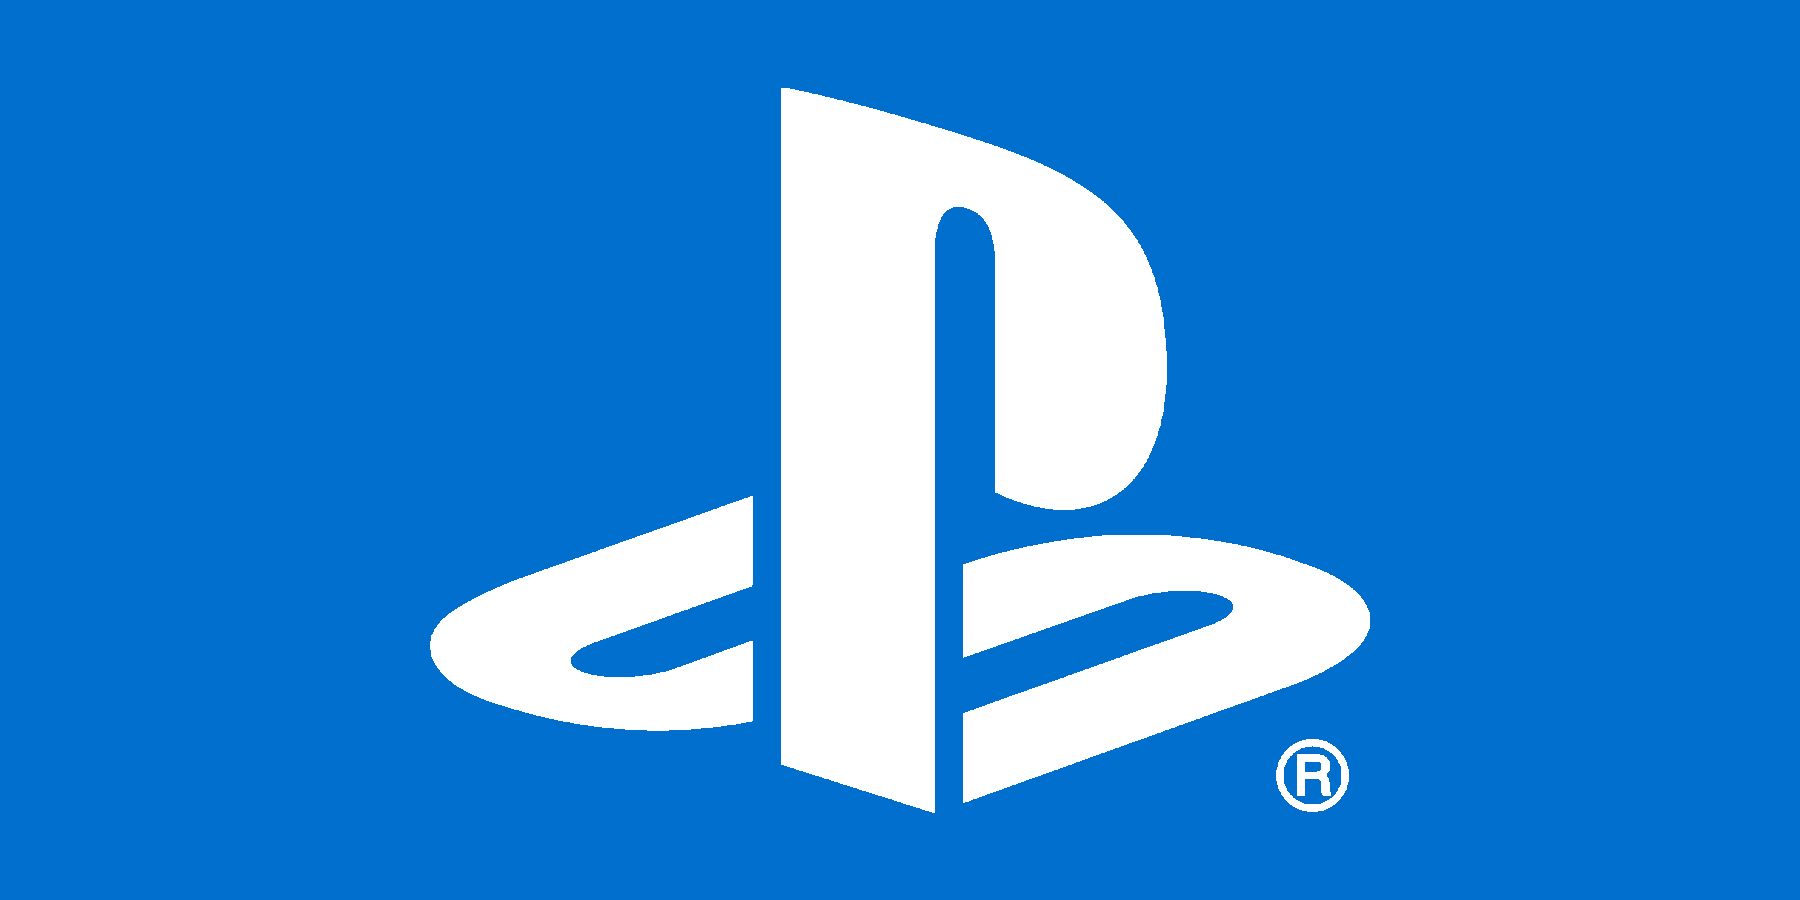 The PlayStation logo on a blue background. 